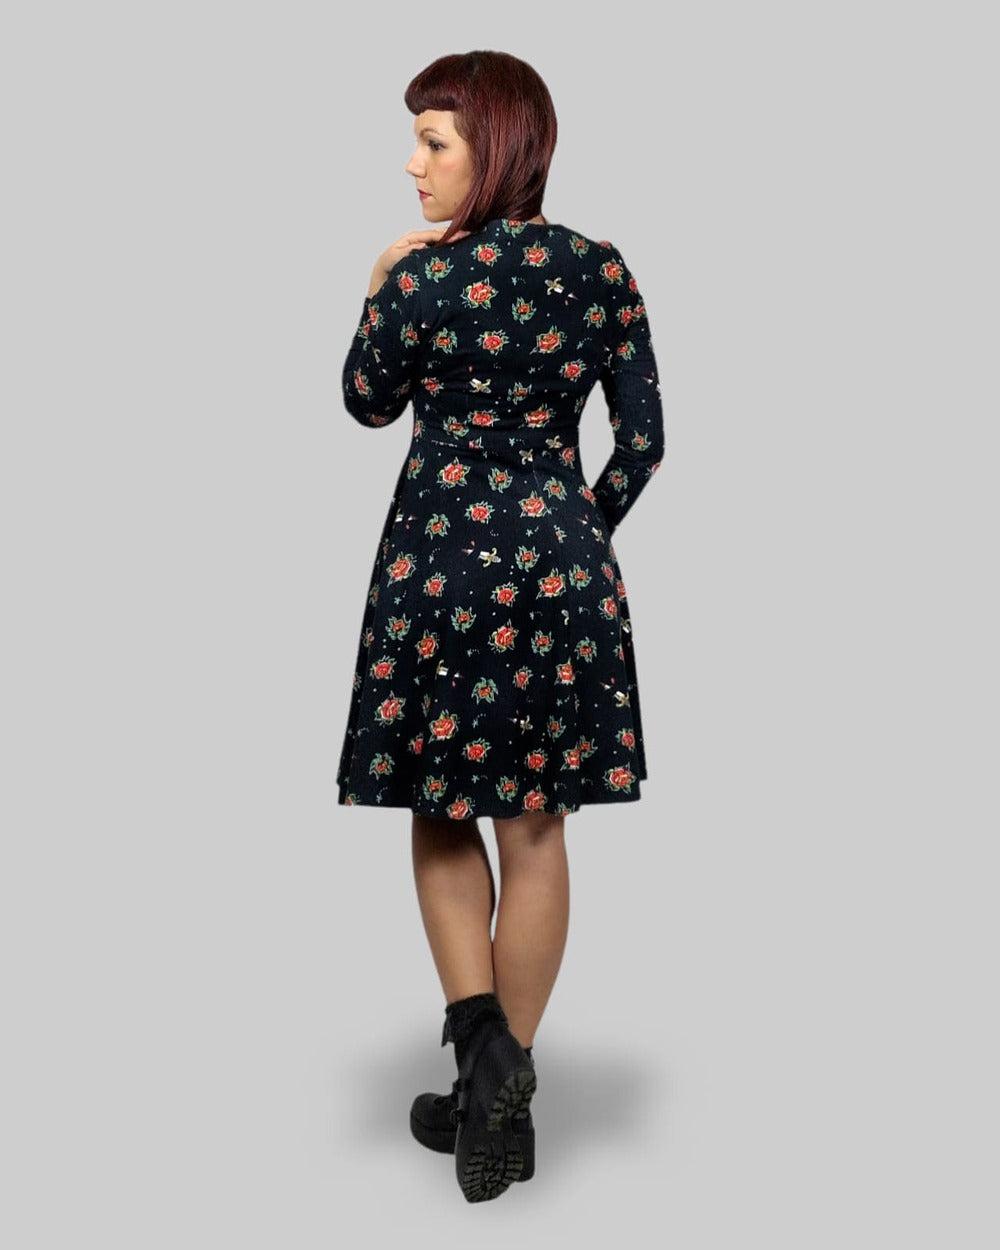 2XL/3XL - Stabbed Heart Tattoos  - Oslo Dress - Easy Fit & Natural Fabric